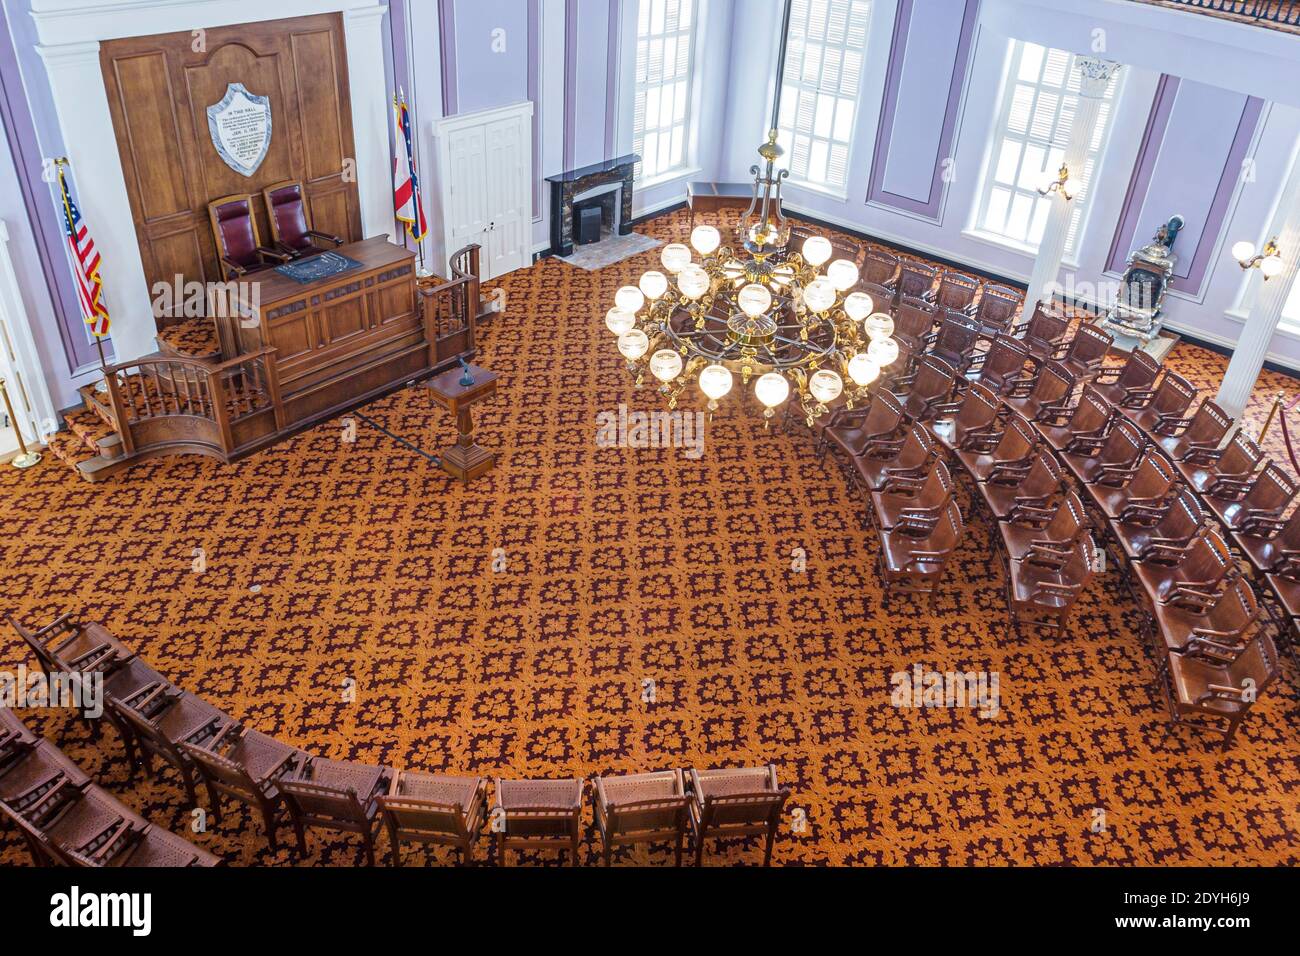 Alabama Montgomery State Capitol building House Chamber,overhead view chandelier inside interior, Stock Photo